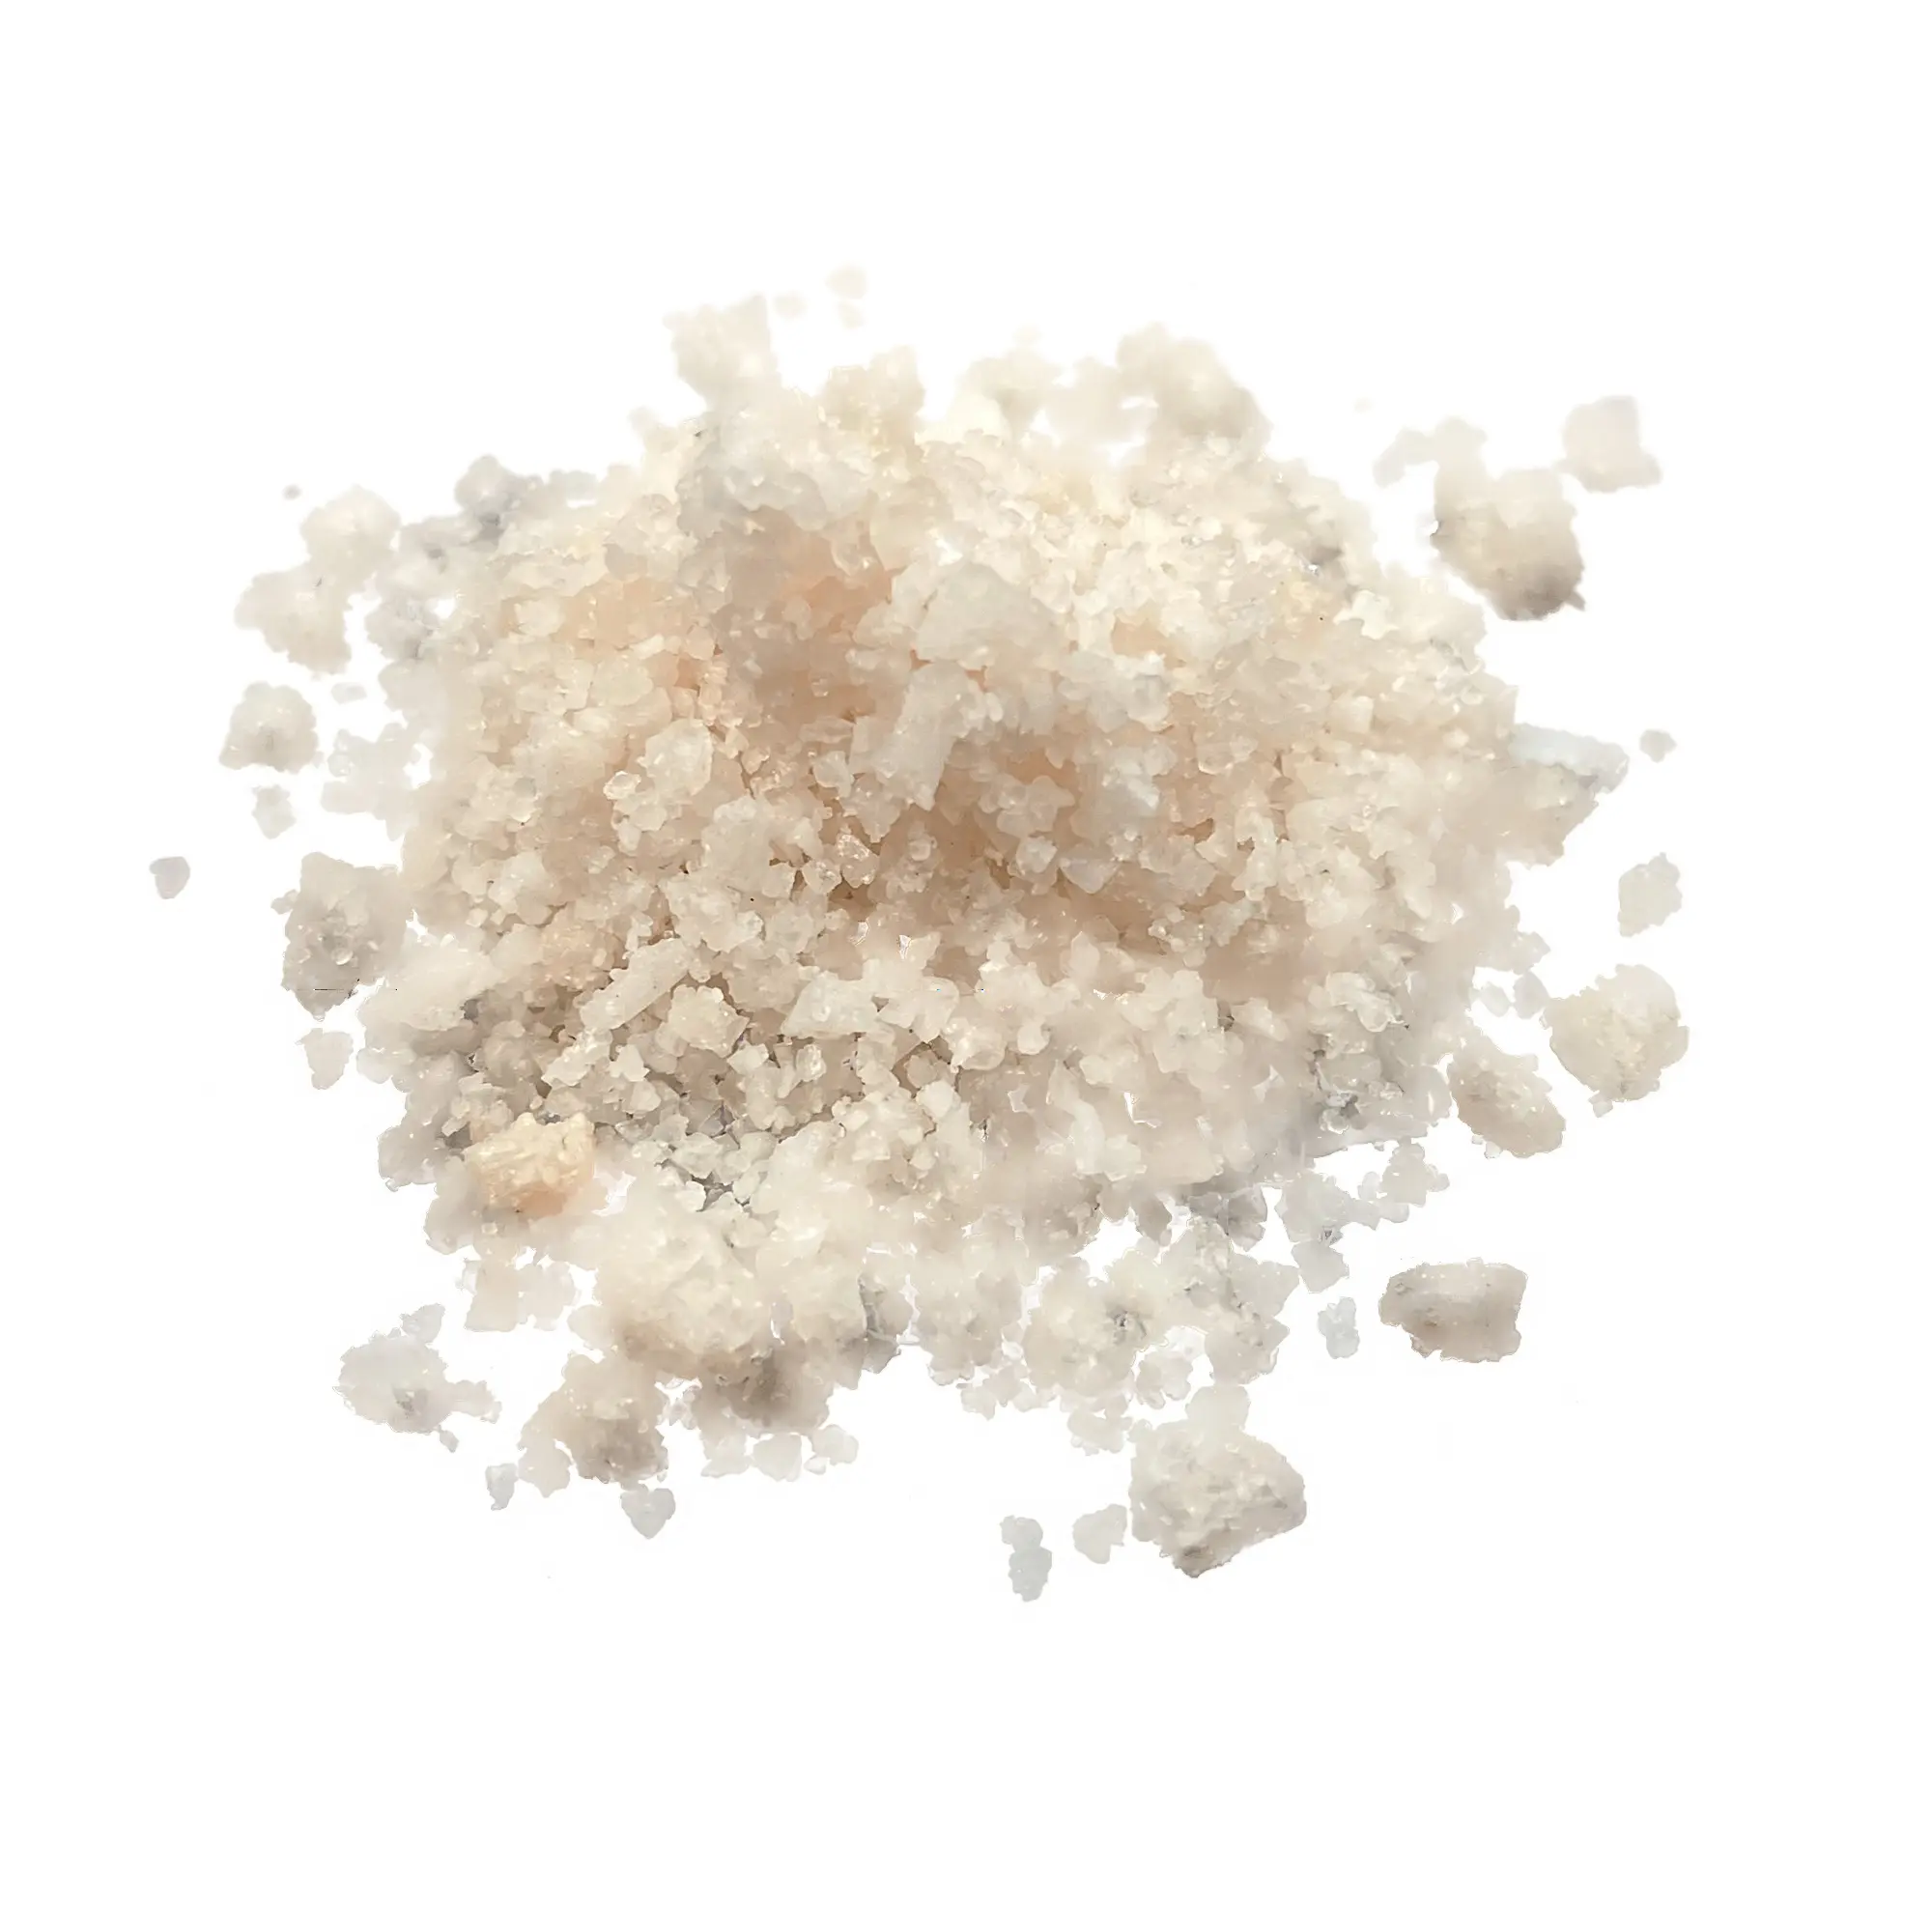 Single washed raw salt from Egypt Salt crystals - 50KG to 1000KG NaCl available Wholesale & Bulk Vessel